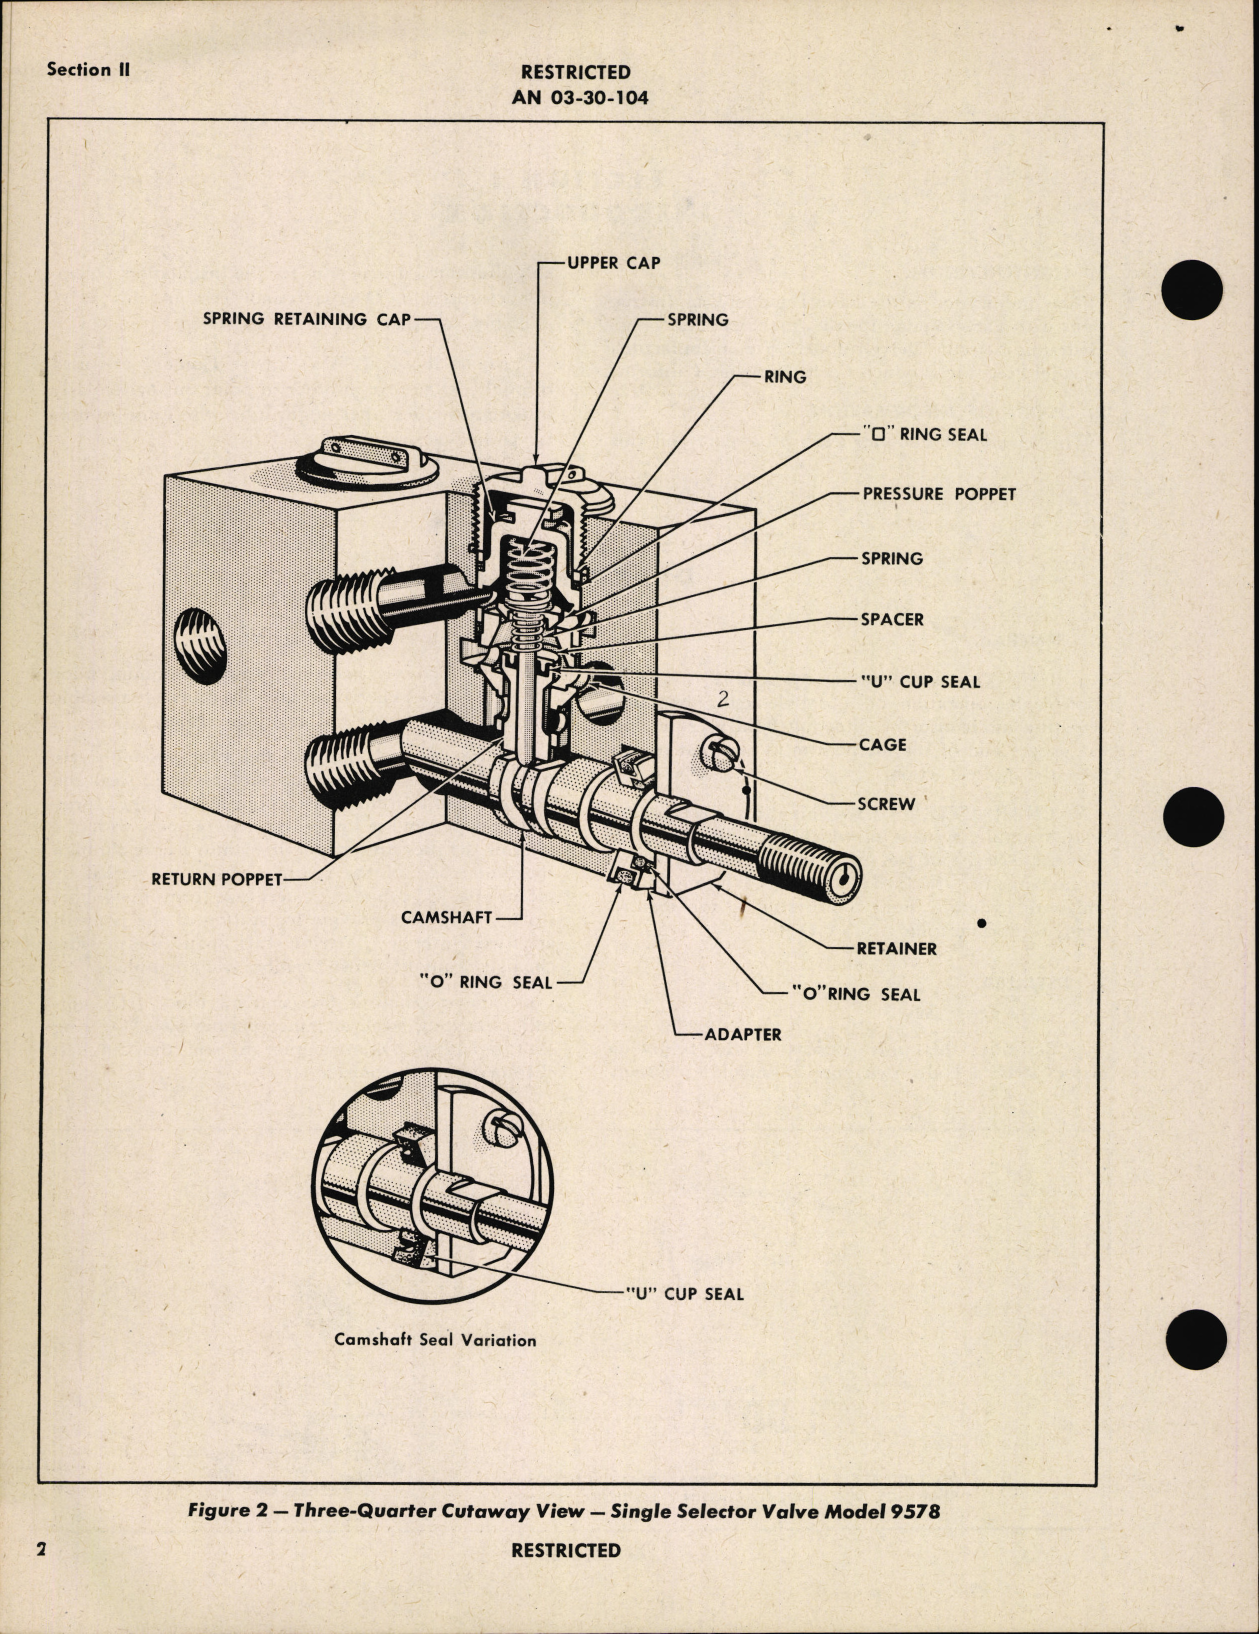 Sample page 6 from AirCorps Library document: Handbook of Instructions with Parts Catalog for Steel Seat Hydraulic Selector Valve Model 9578